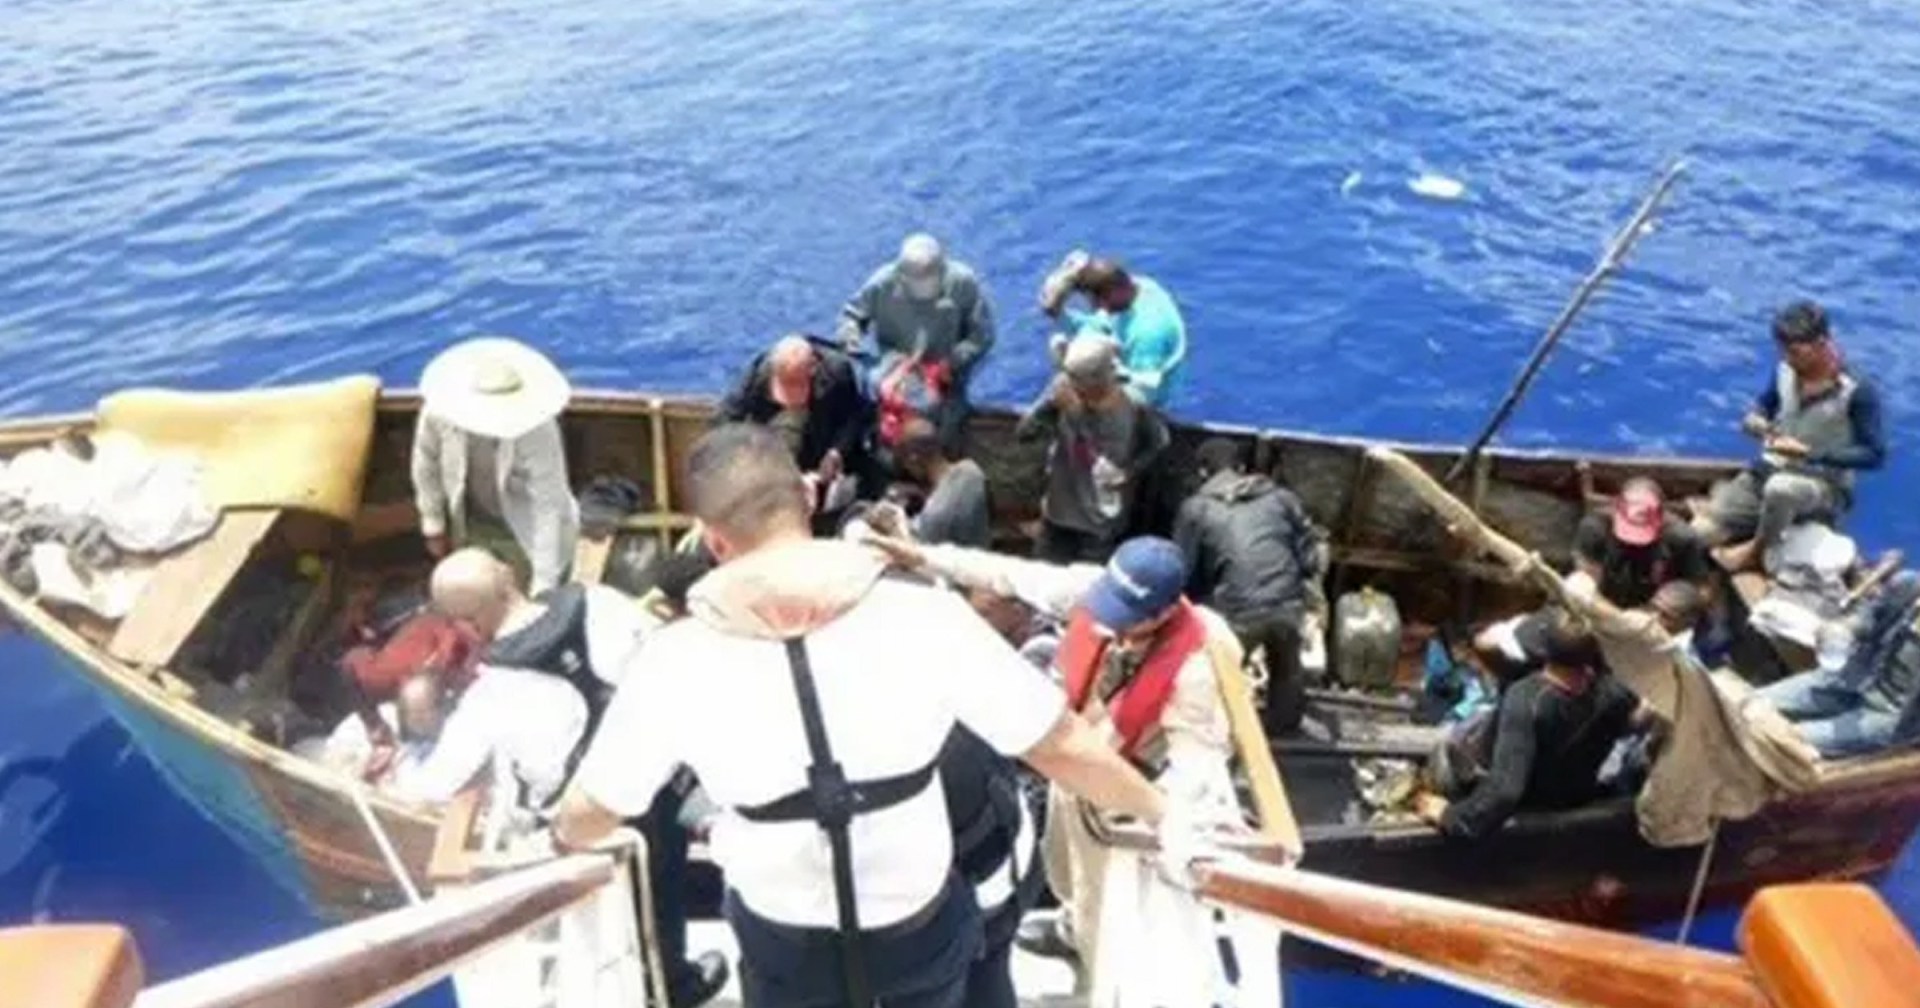 cruise ship rescues migrants on small wooden boat signaling for help